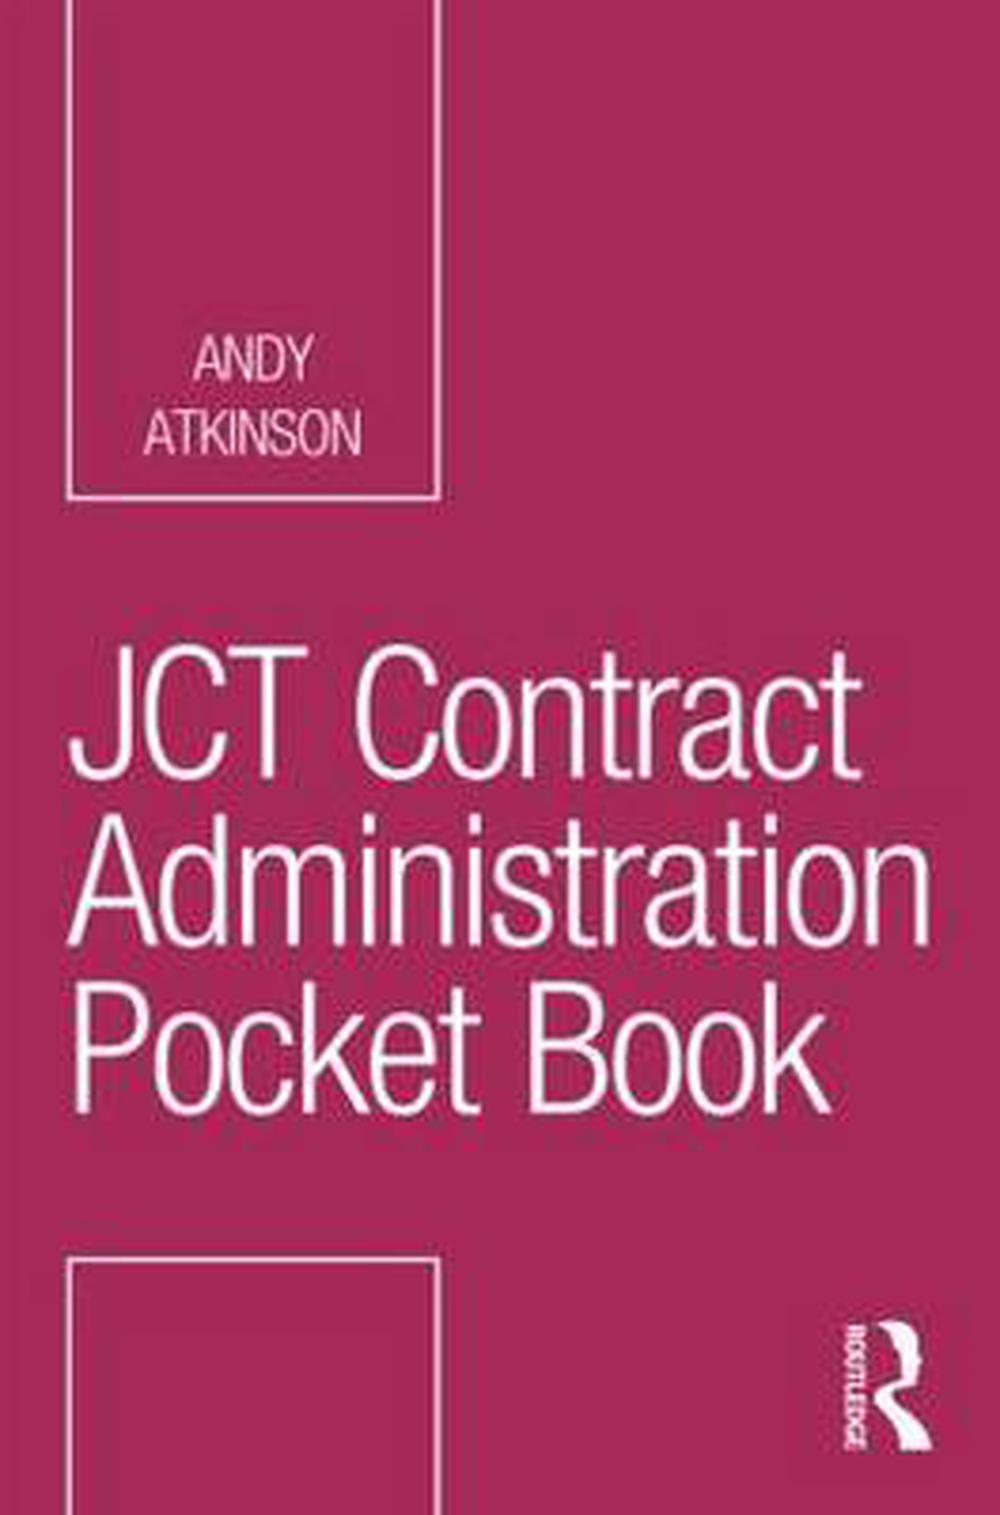 jct conditions of contract